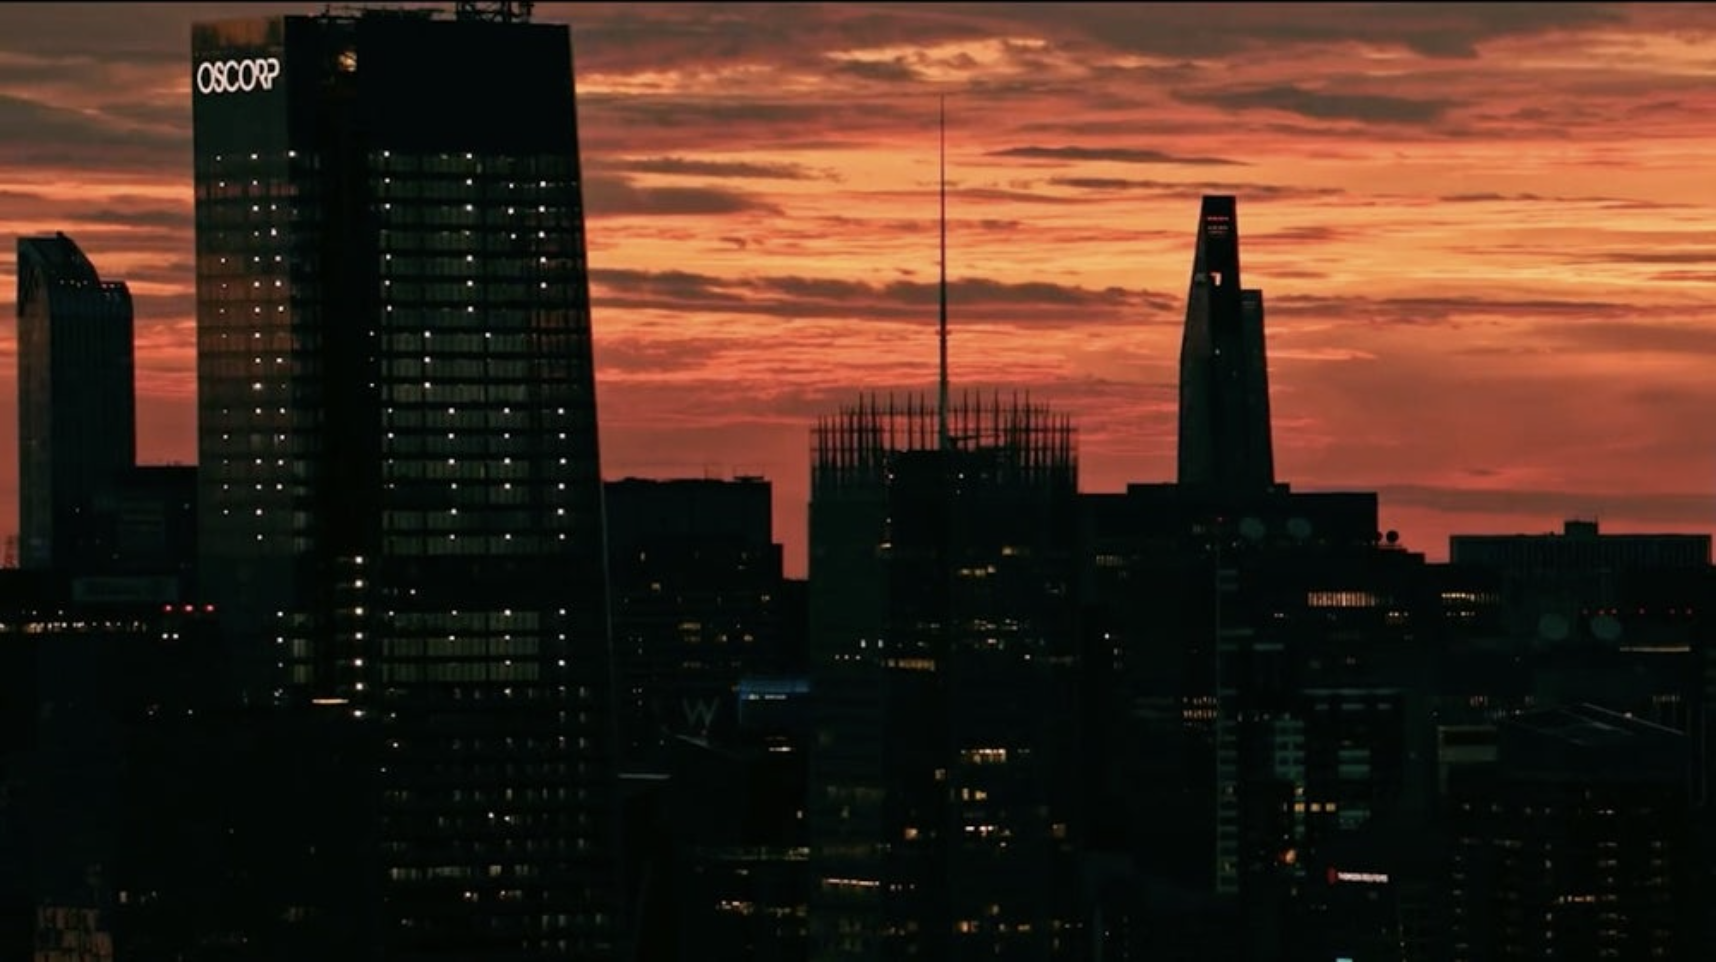 The Oscorp building on the left with other city buildings in the skyline visible in front of an orange sky